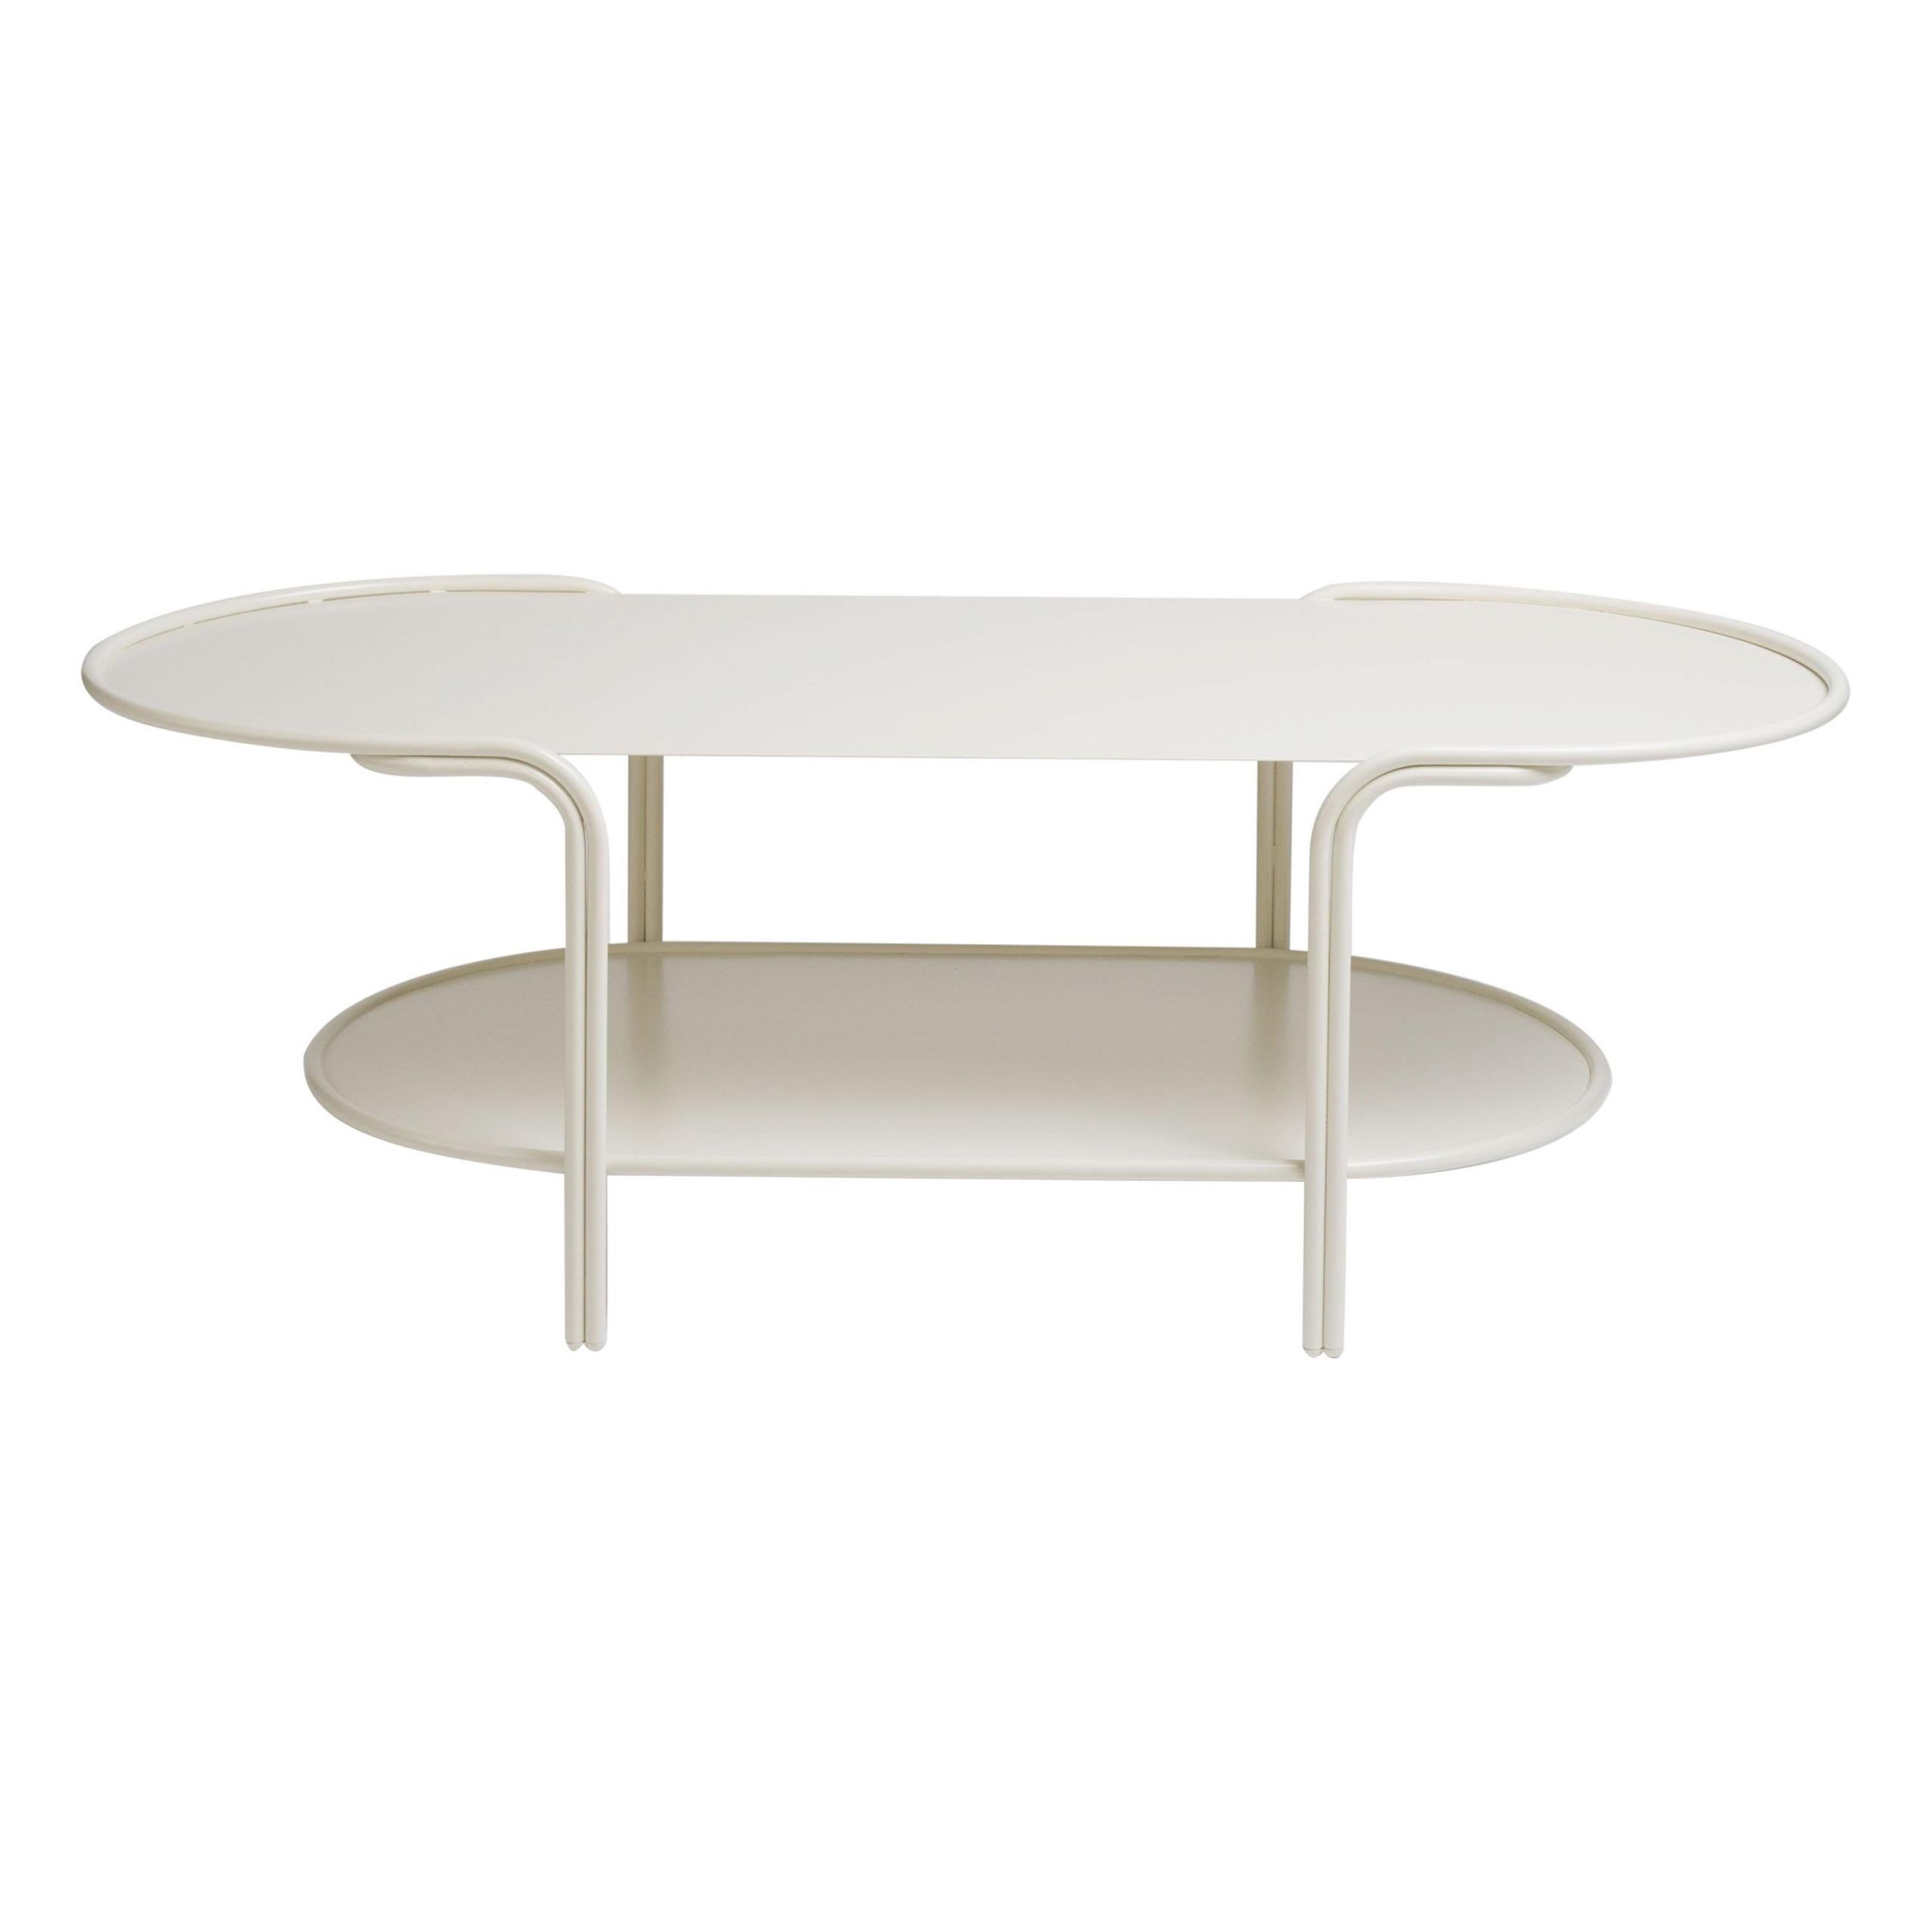 Latest Tiered Outdoor Bancroft Coffee Table In Matte Cream Stainless Steellaun  For Sale At 1stdibs Inside Matte Outdoor Tables (View 5 of 15)